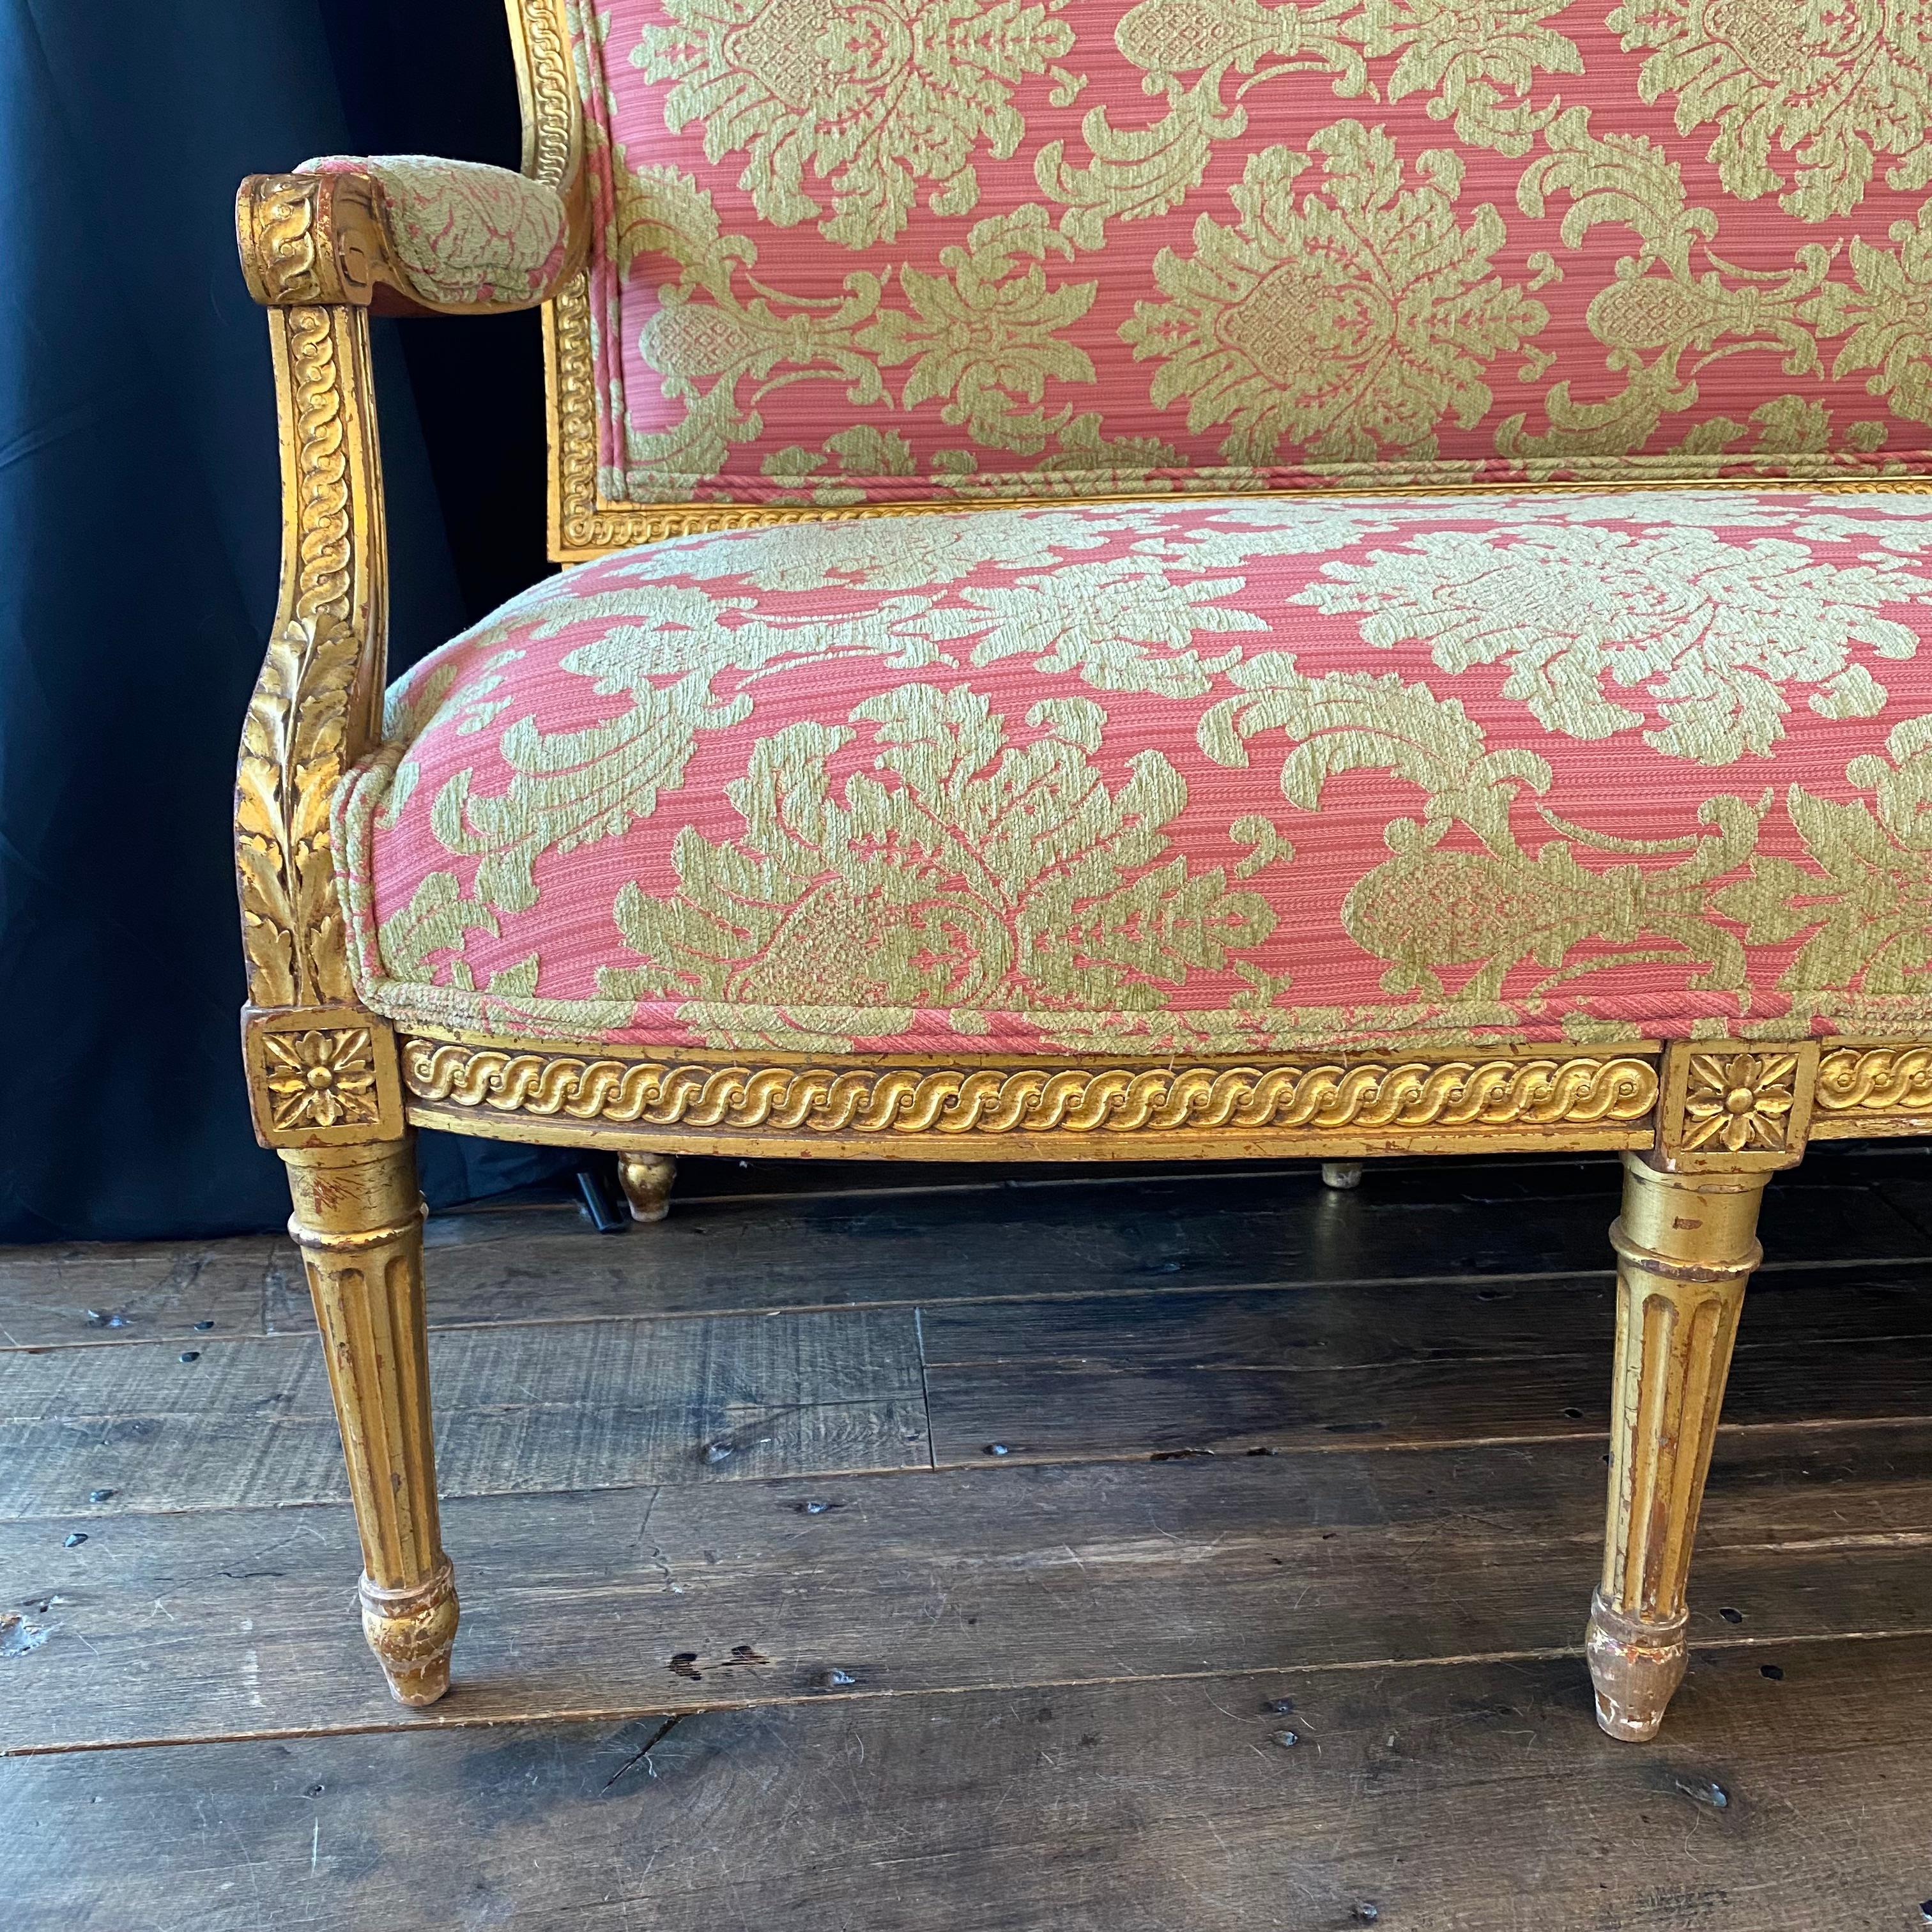 Glamorous French Louis XVI Style Gold Giltwood Sofa with Damask Upholstery In Good Condition For Sale In Hopewell, NJ